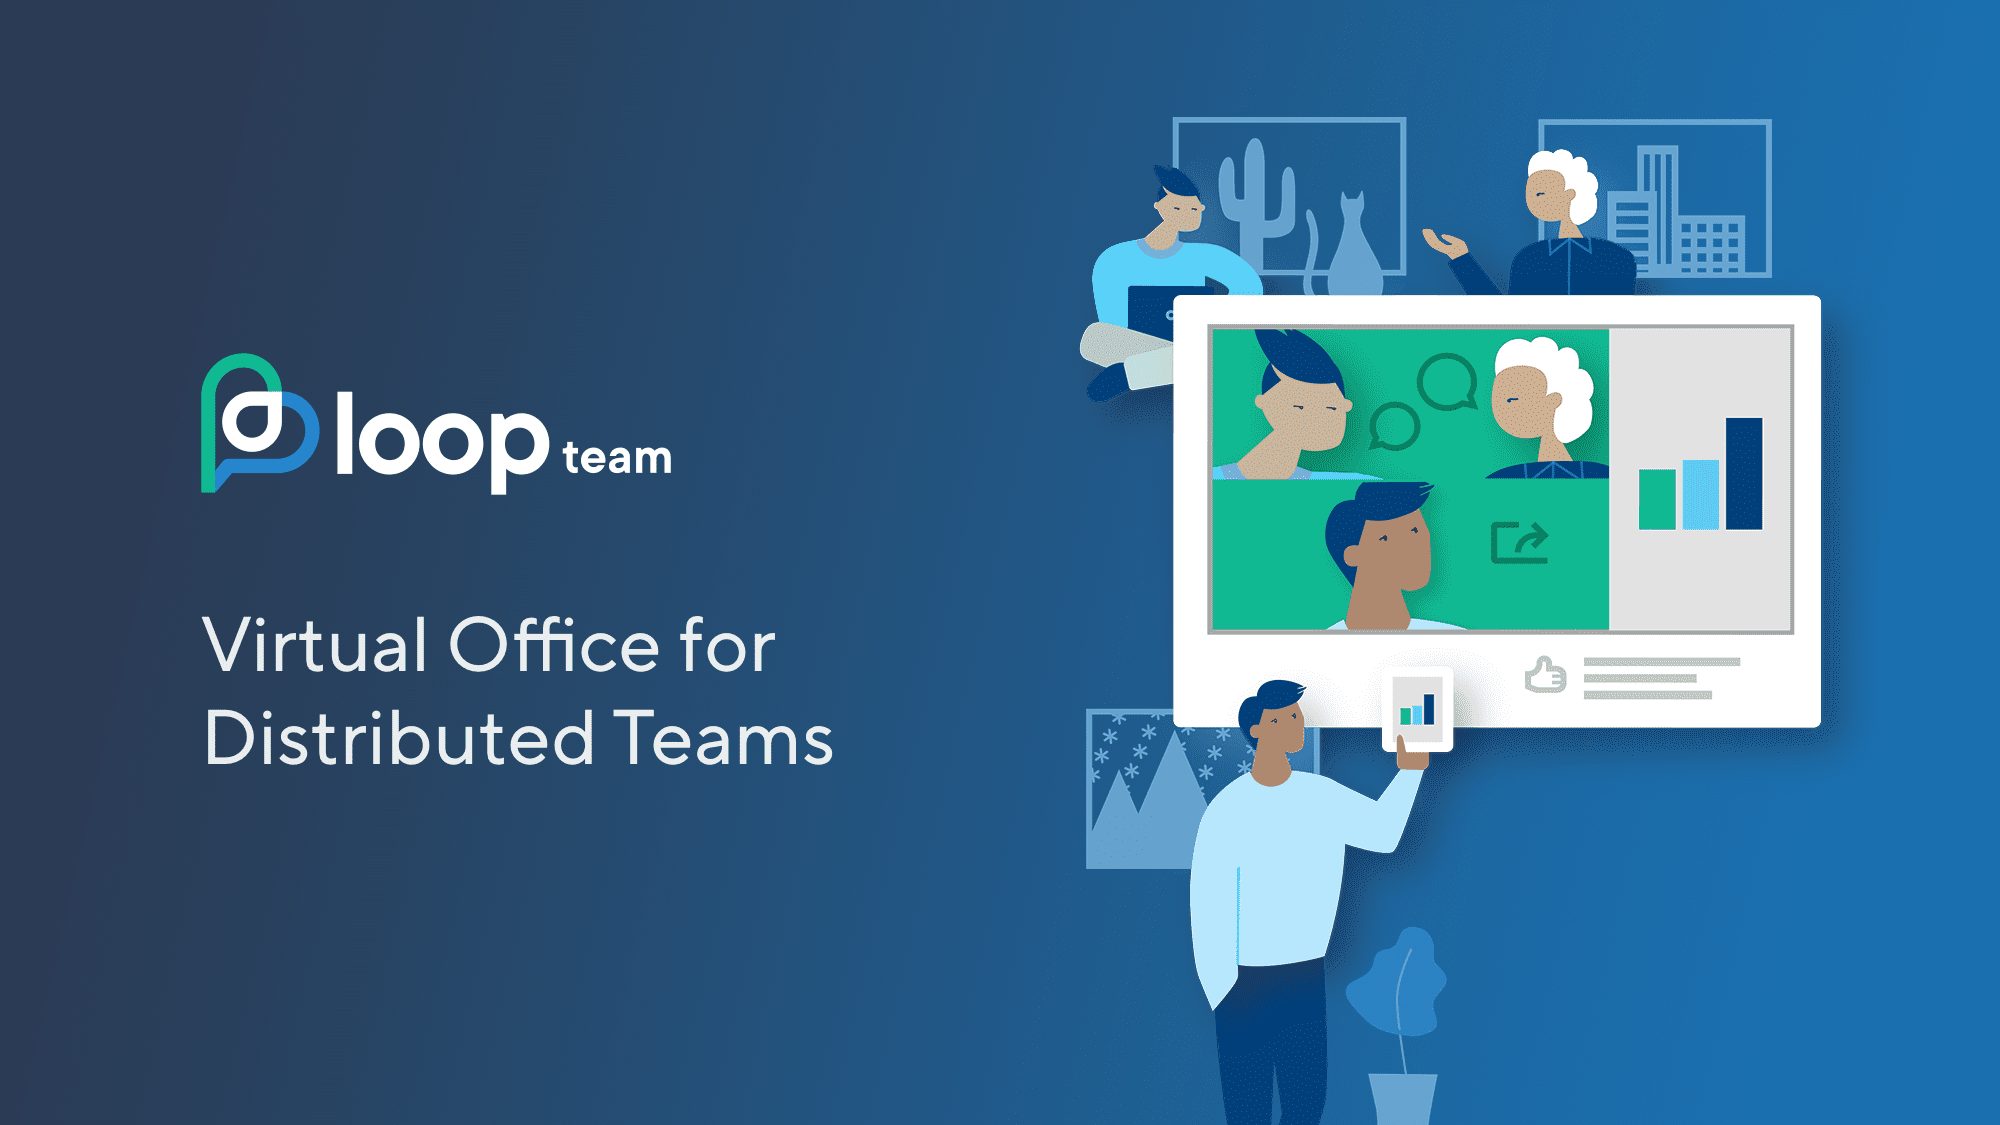 loop-team-makes-distributed-teams-more-connected-amid-covid-19-feat-img